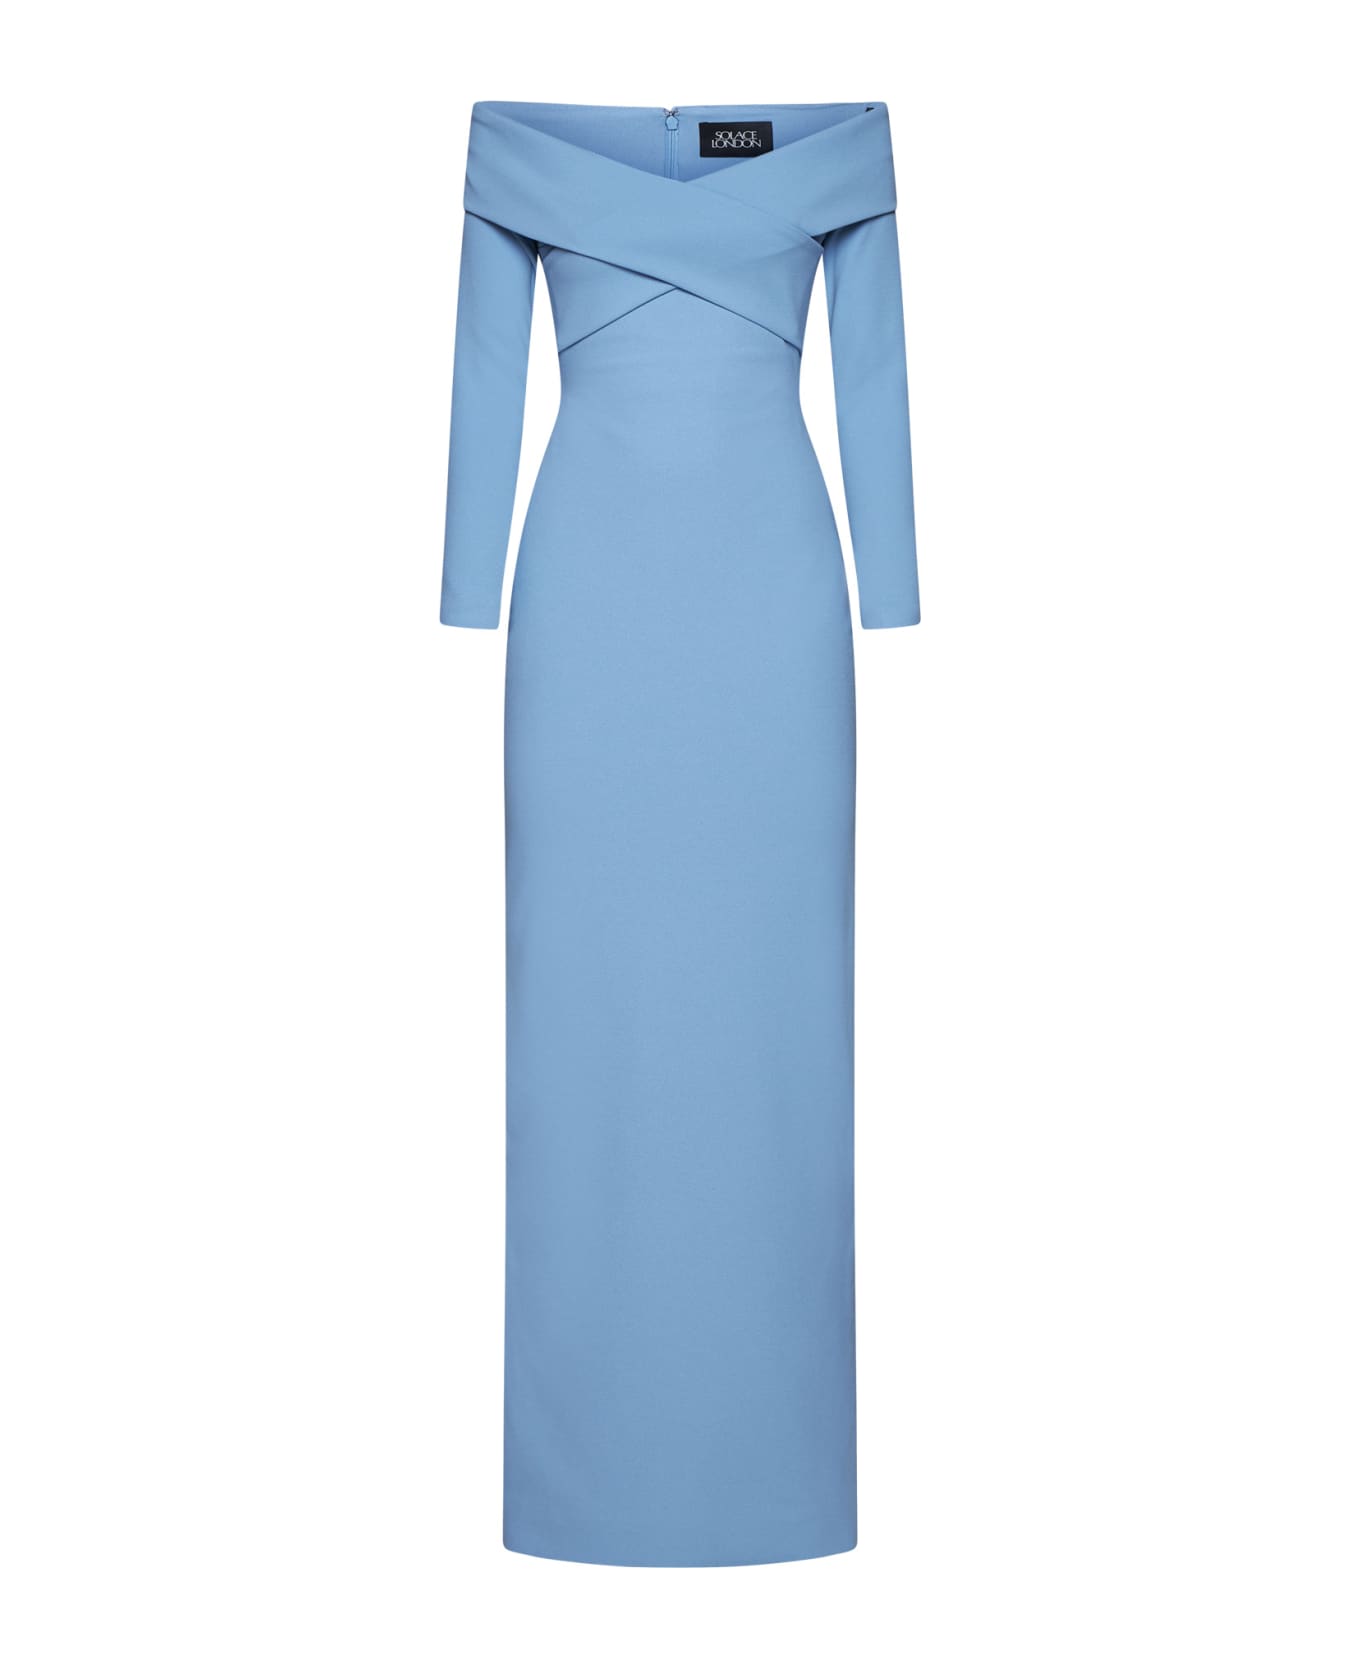 Solace London Dress - Bluebell